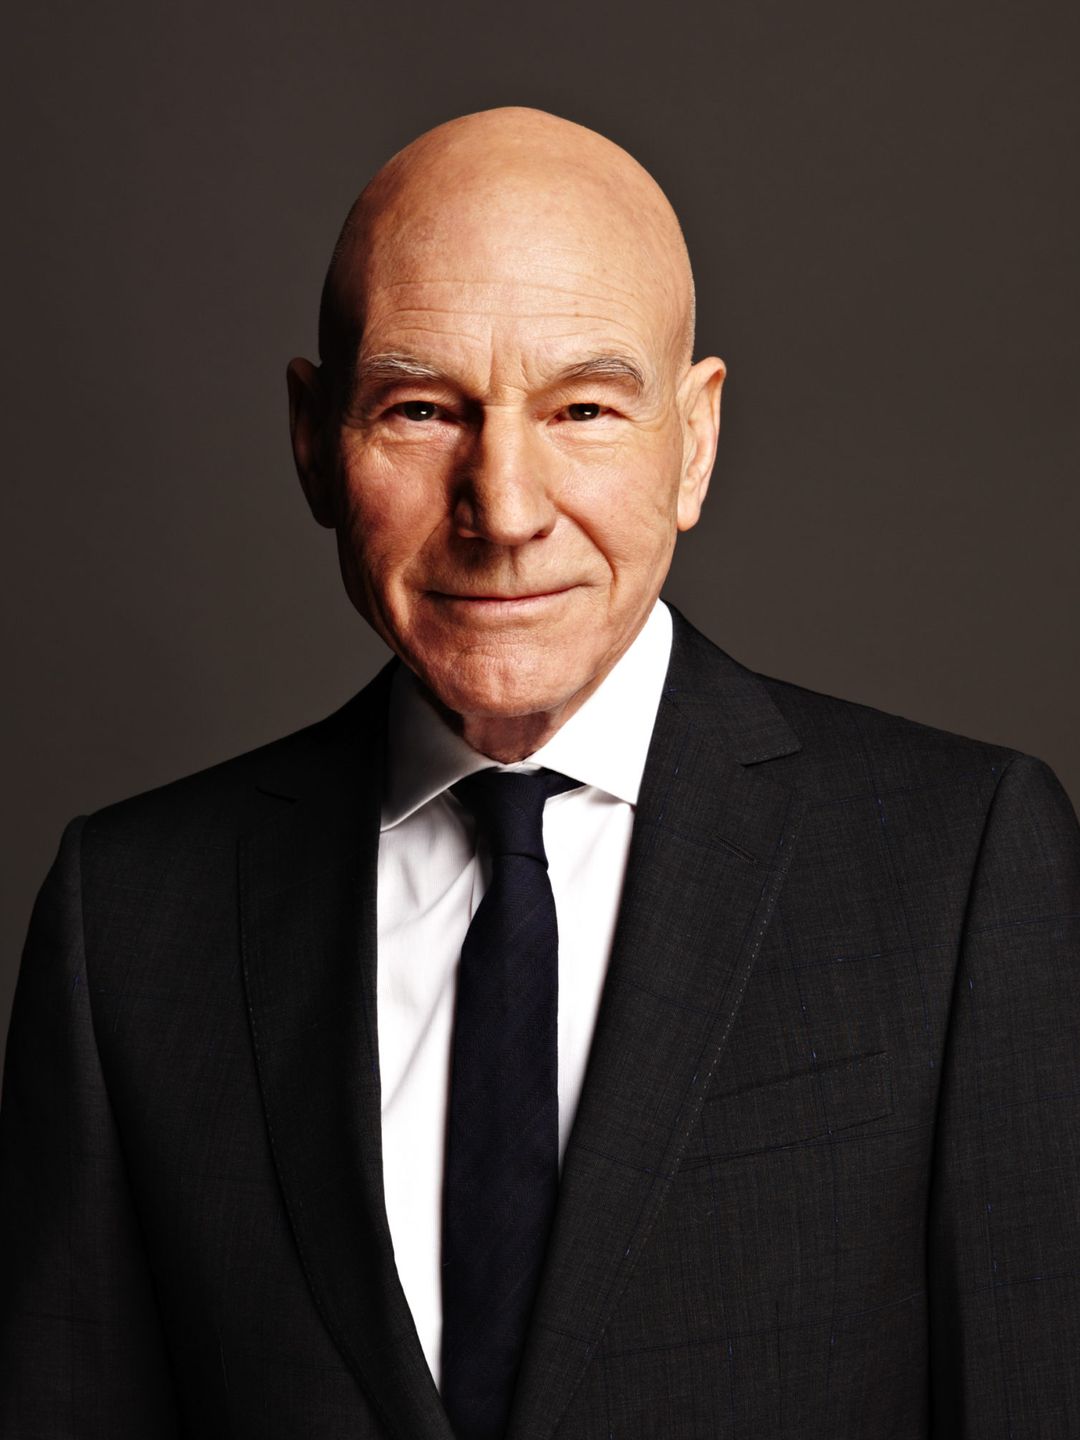 Patrick Stewart who is his father